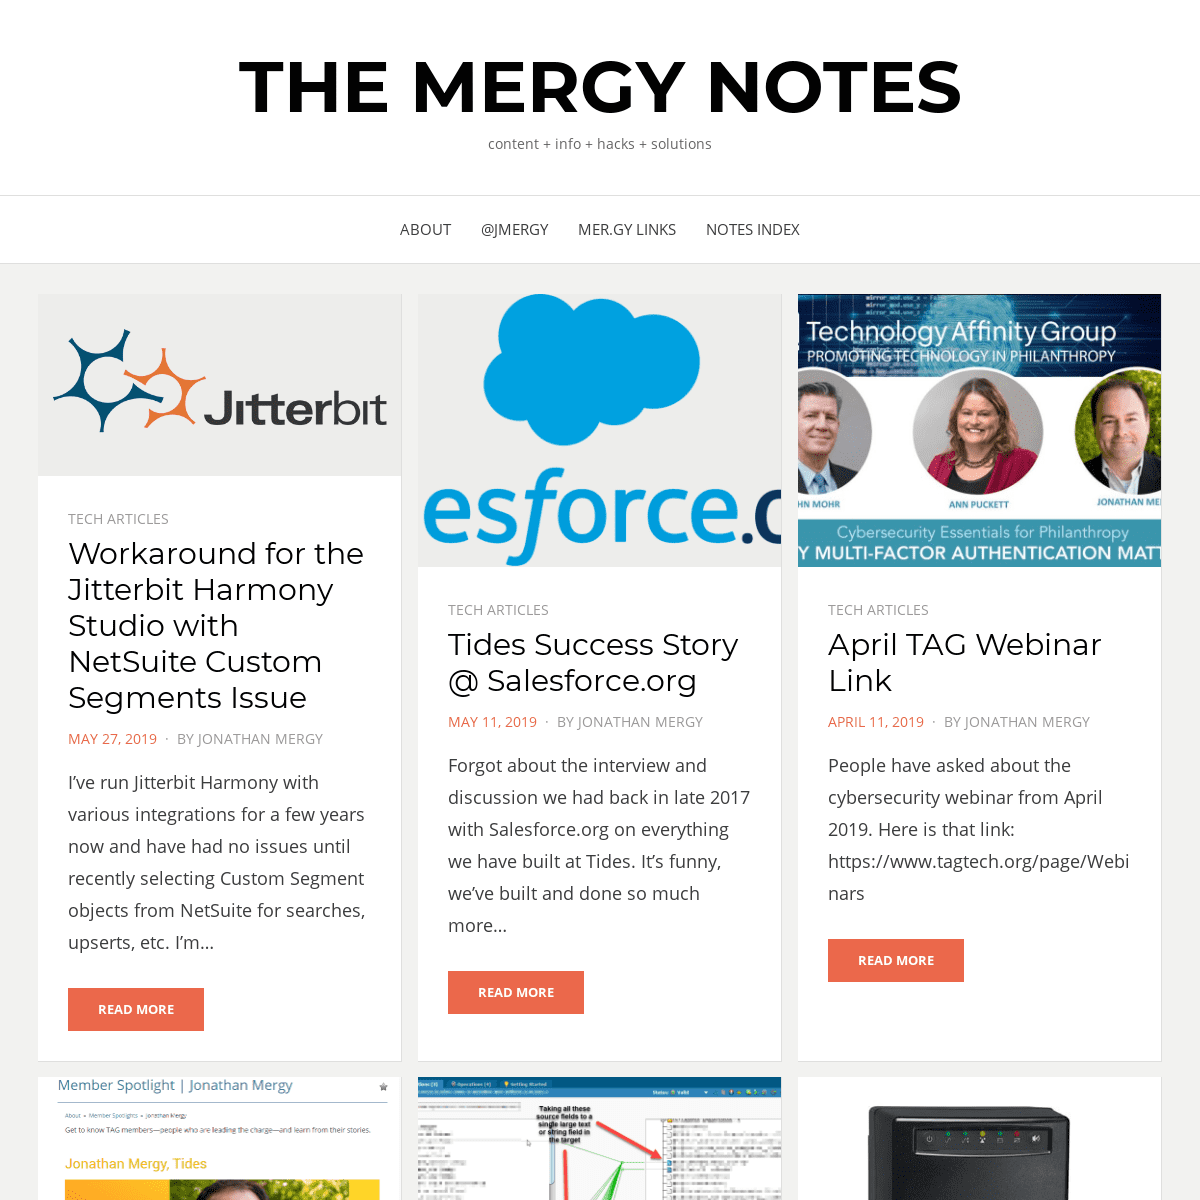 The Mergy Notes – content + info + hacks + solutions